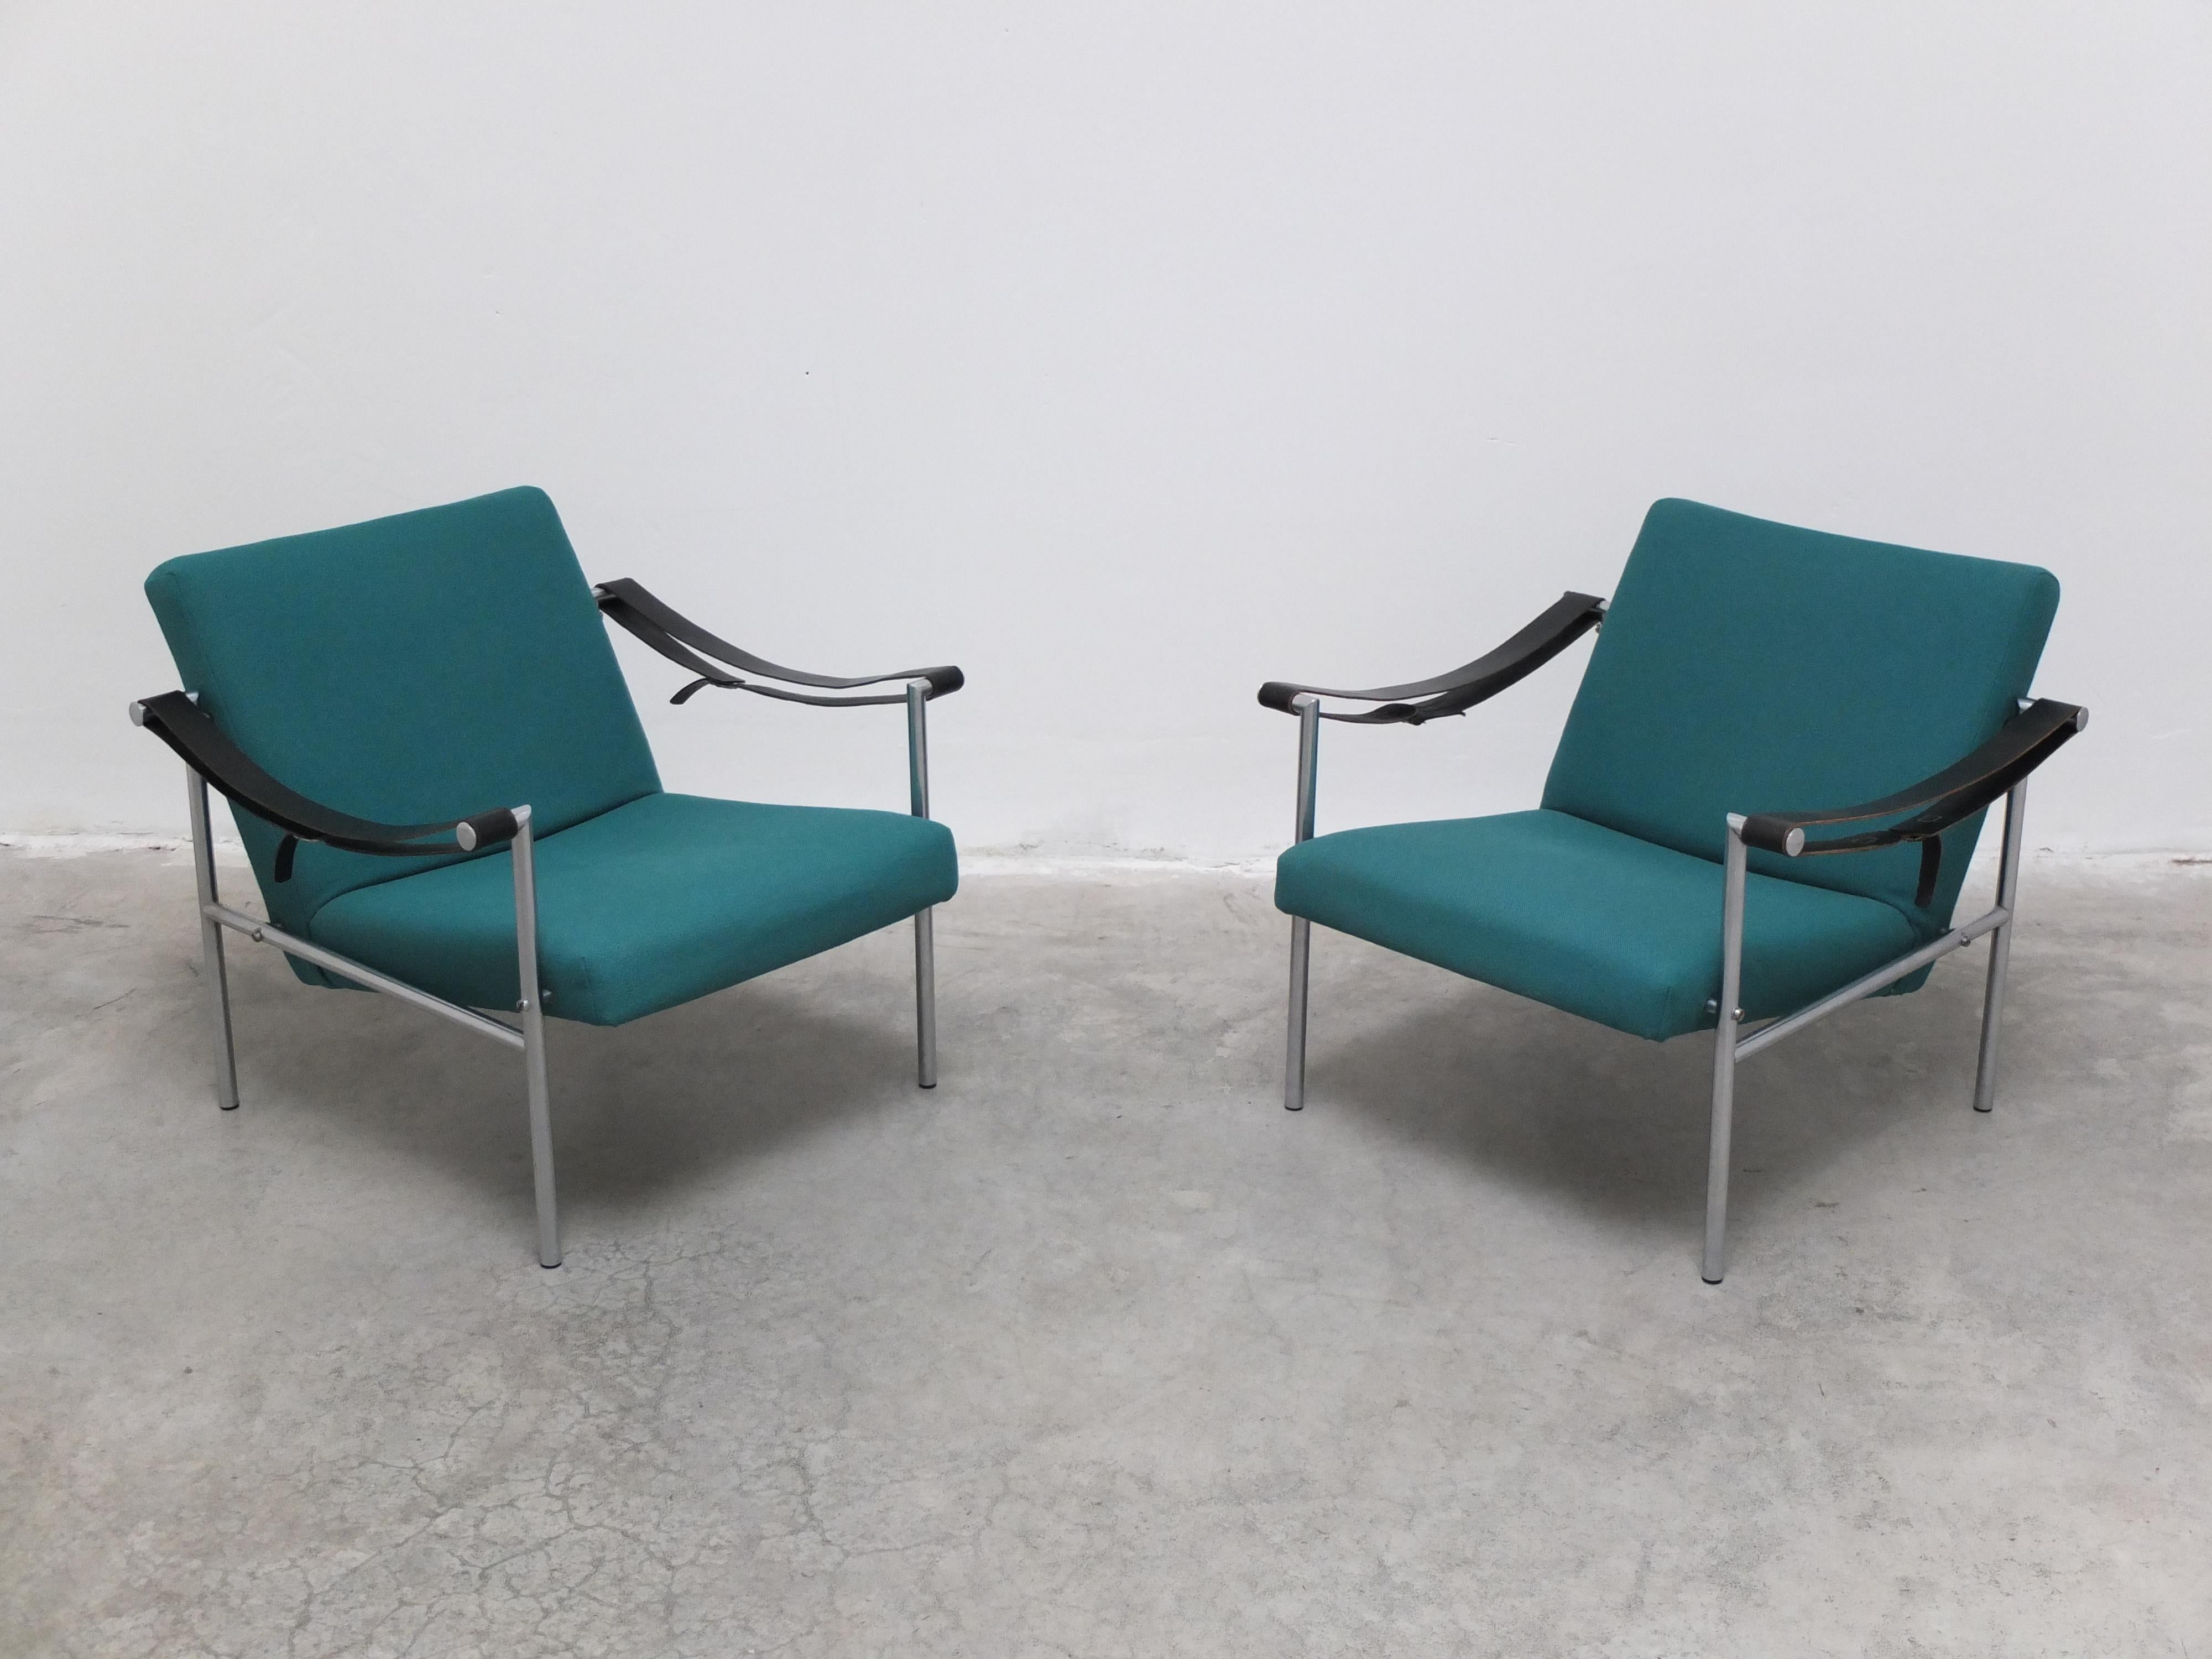 Pair of 'SZ08' Lounge Chairs by Martin Visser for 't Spectrum, 1960 For Sale 5